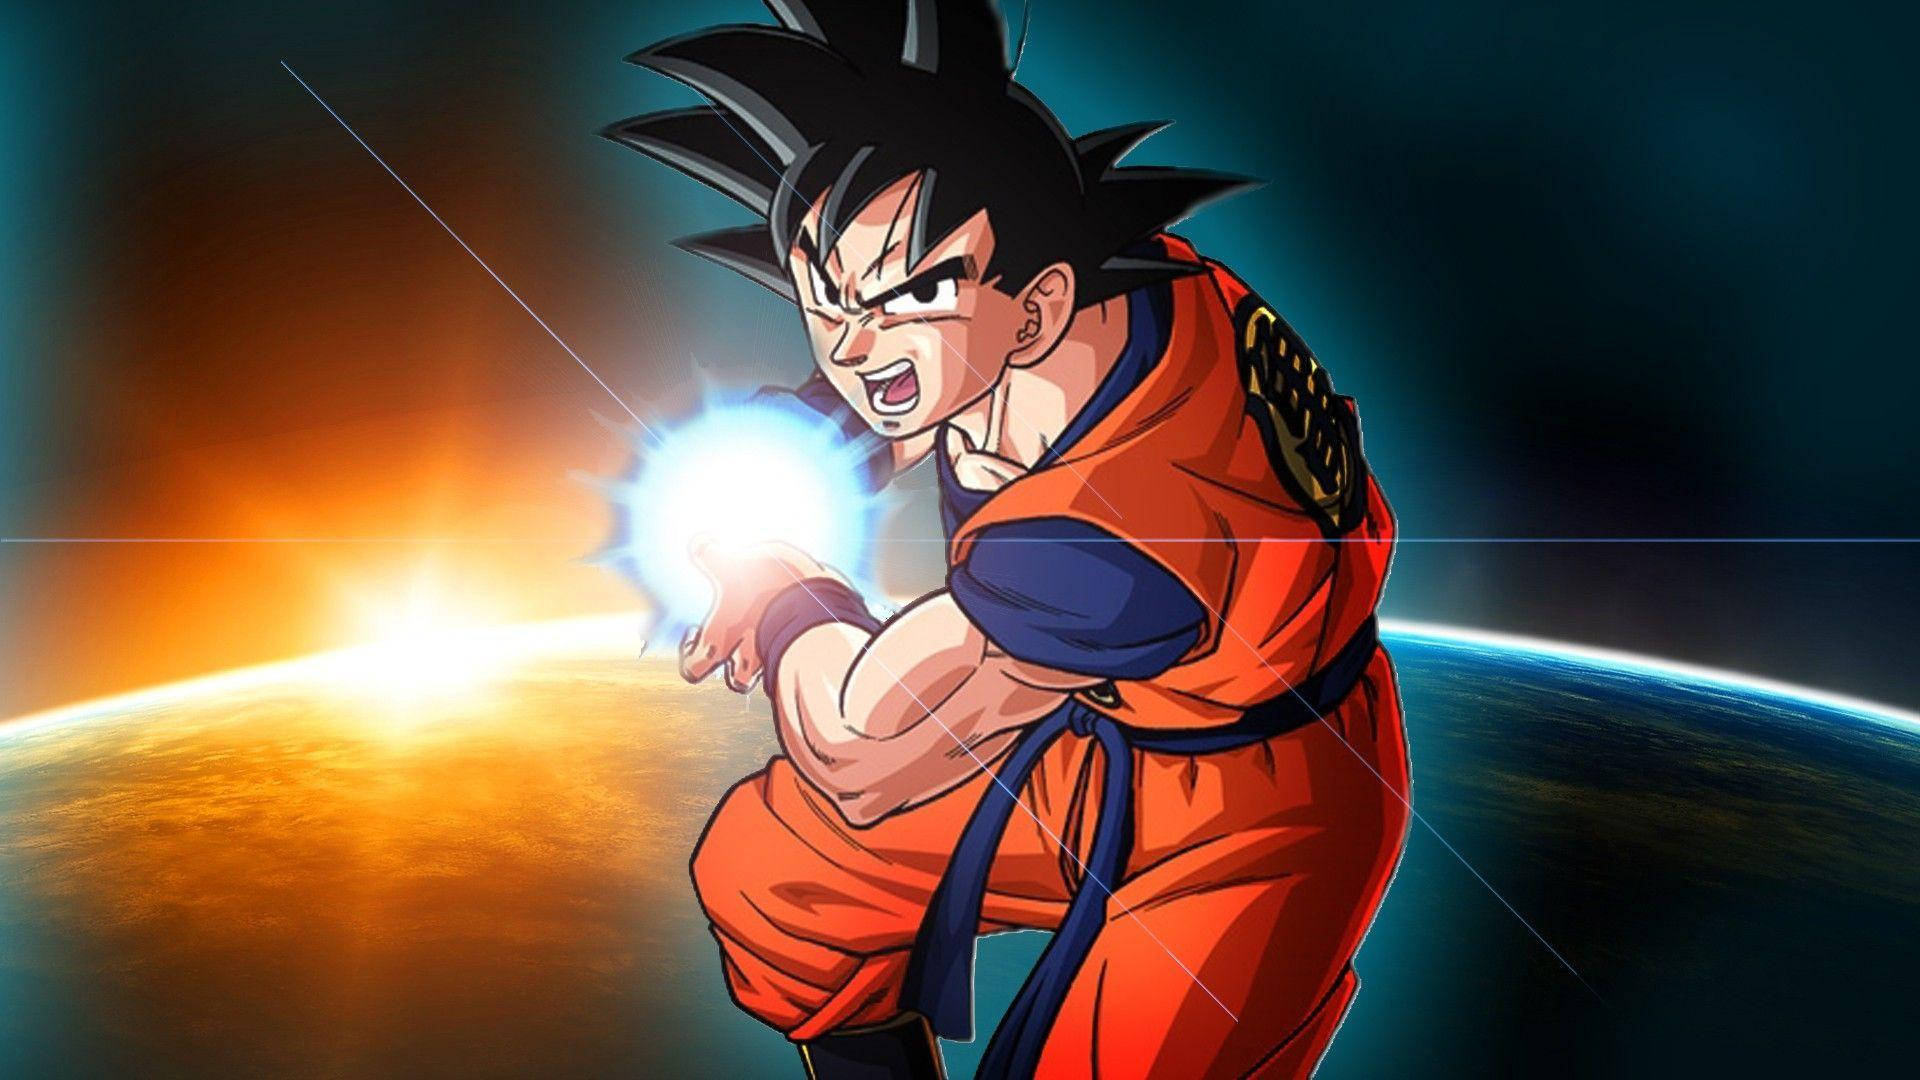 80 Dragon Ball Wallpapers & Backgrounds